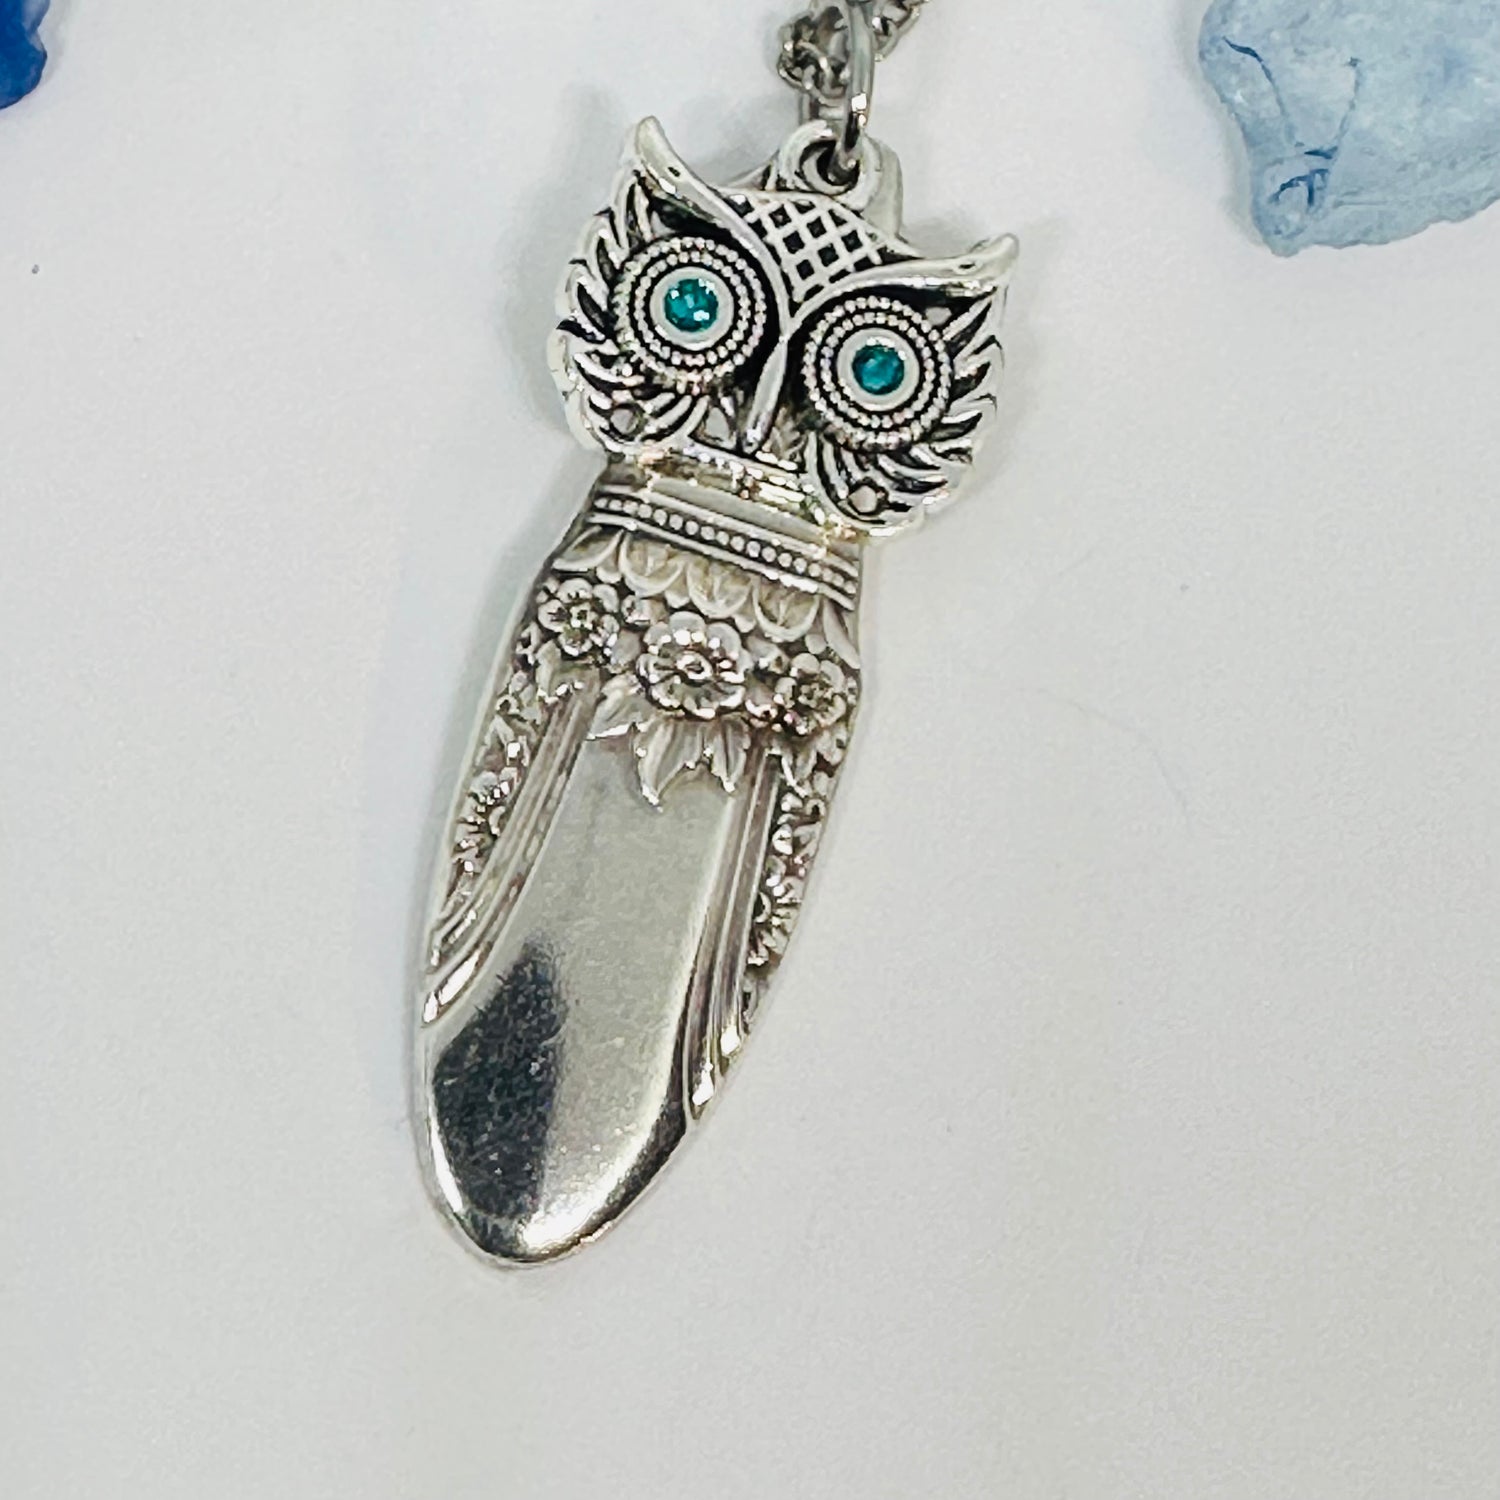 Owls made with Vintage Silverware and Birthstones